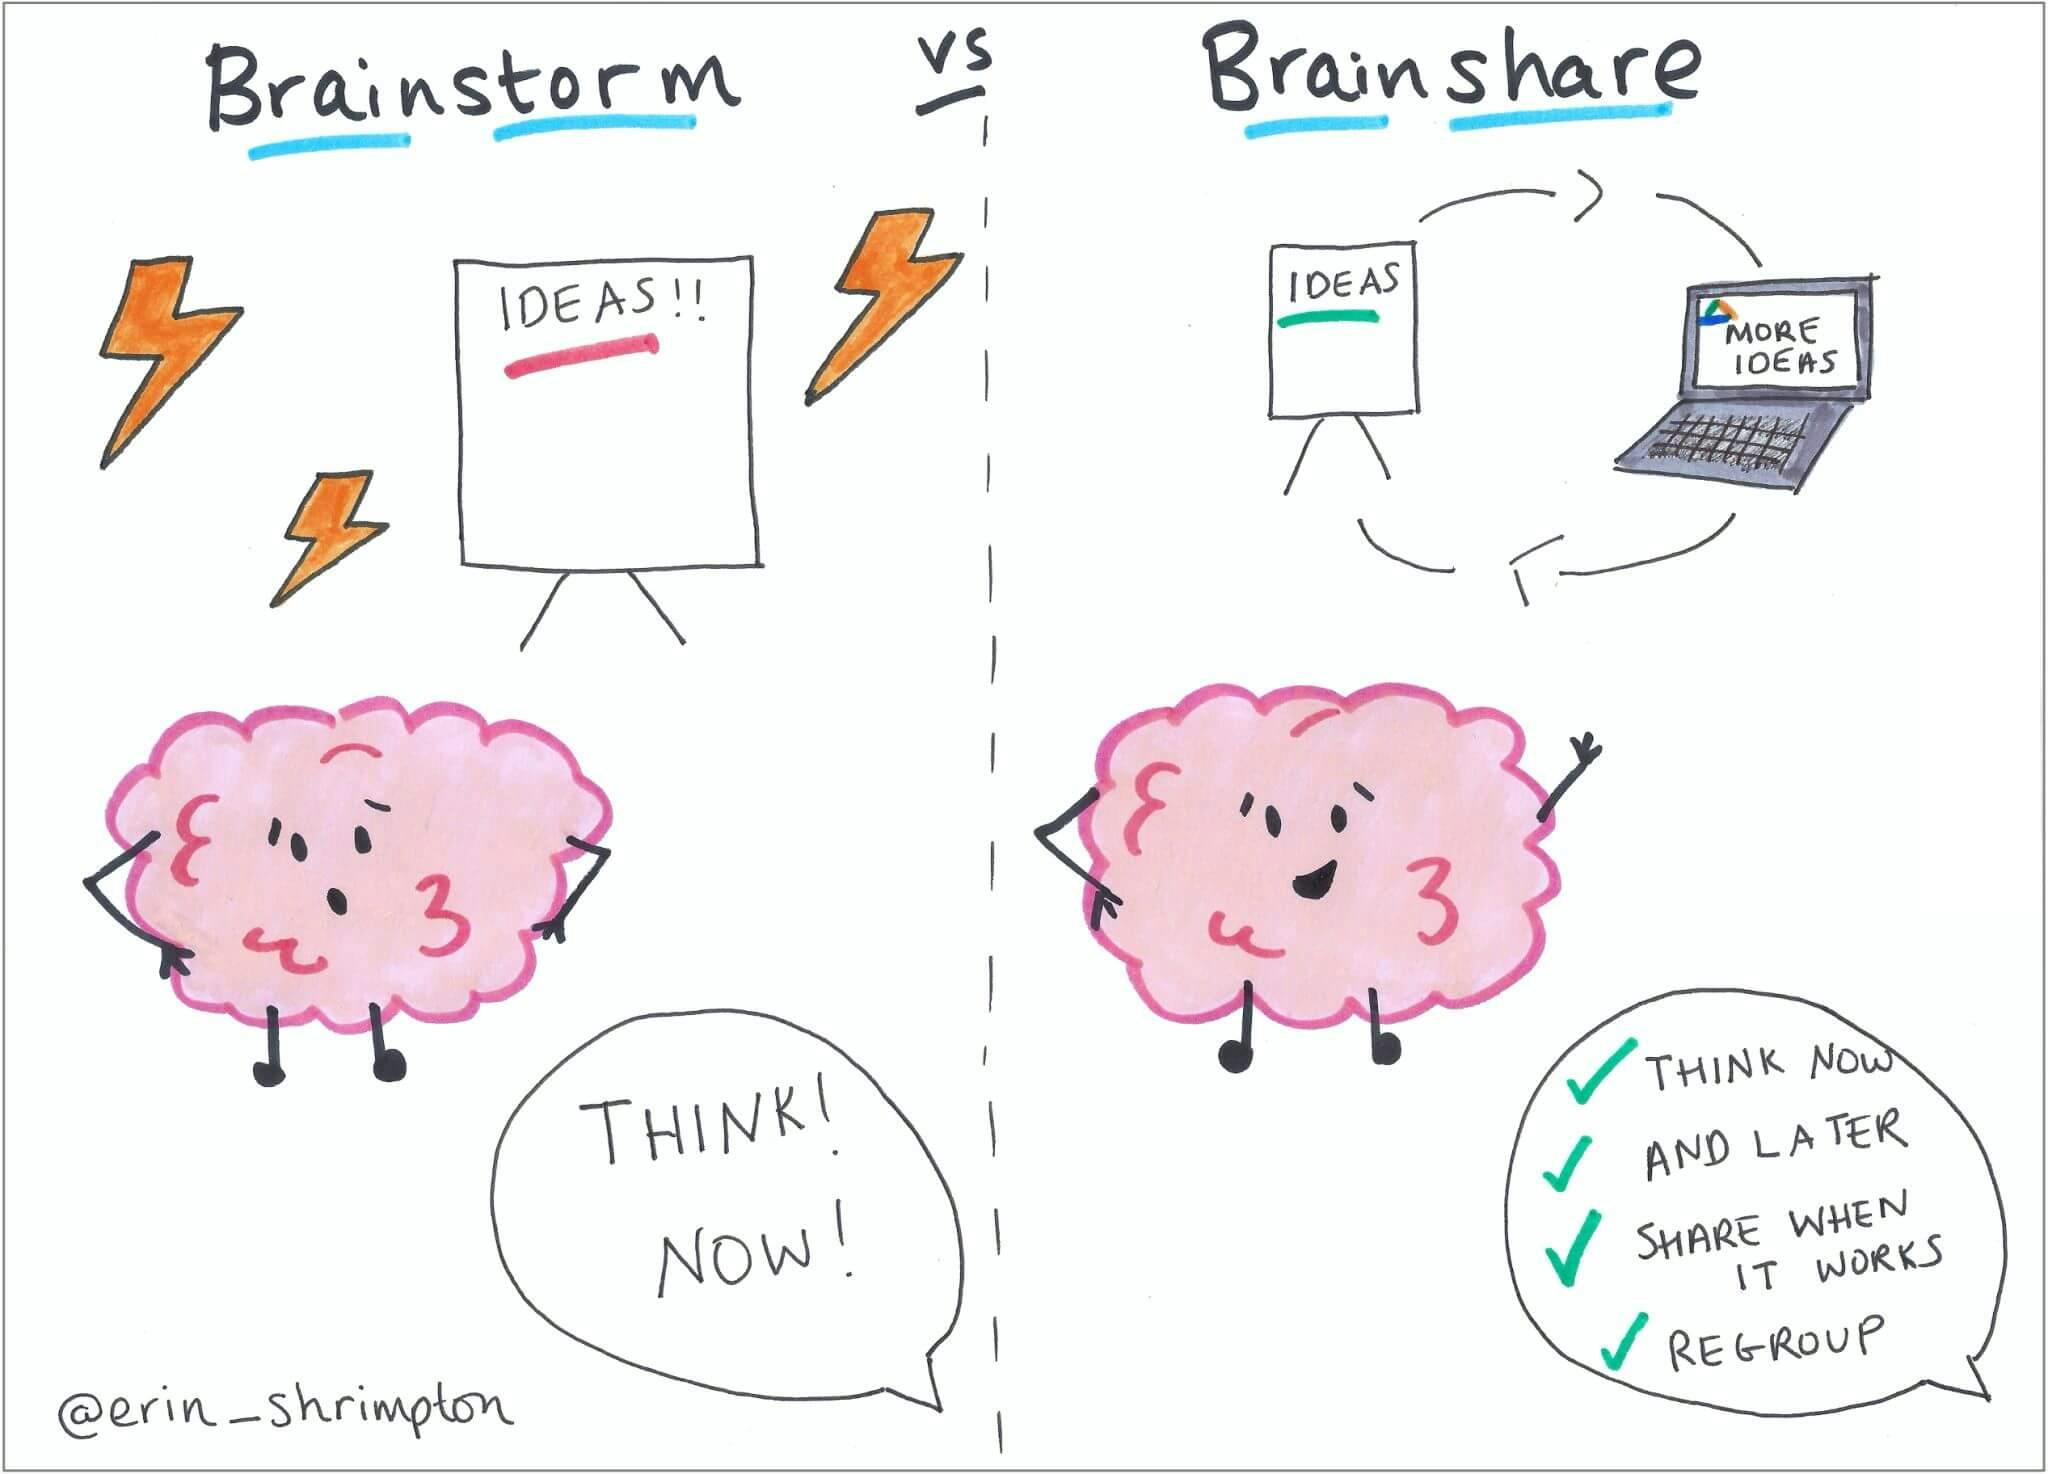 A cartoon comparing brainstorming to brainsharingg, and highlighting the additional positives of the latter